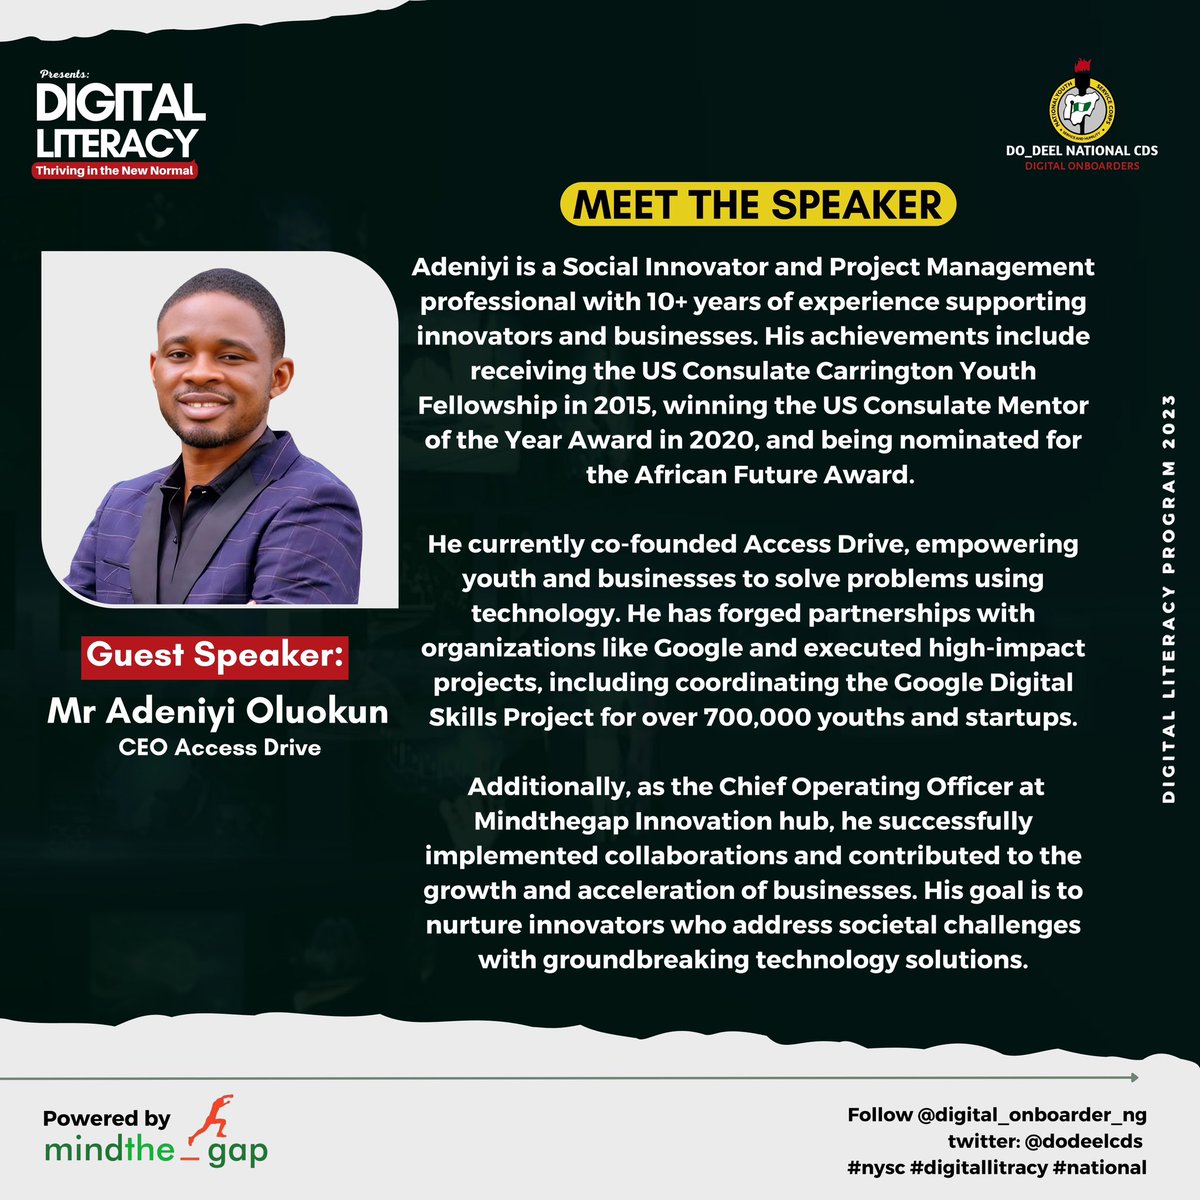 📢 Join us for the exciting third day of digital literacy! 🔥🔥🔥 Don't miss the opportunity to meet our esteemed speaker who will be sharing valuable insights. 🌸 Mark your calendars and see you at 3:45pm for this live event! #DigitalLiteracy #OnlineTraining #Sensitization